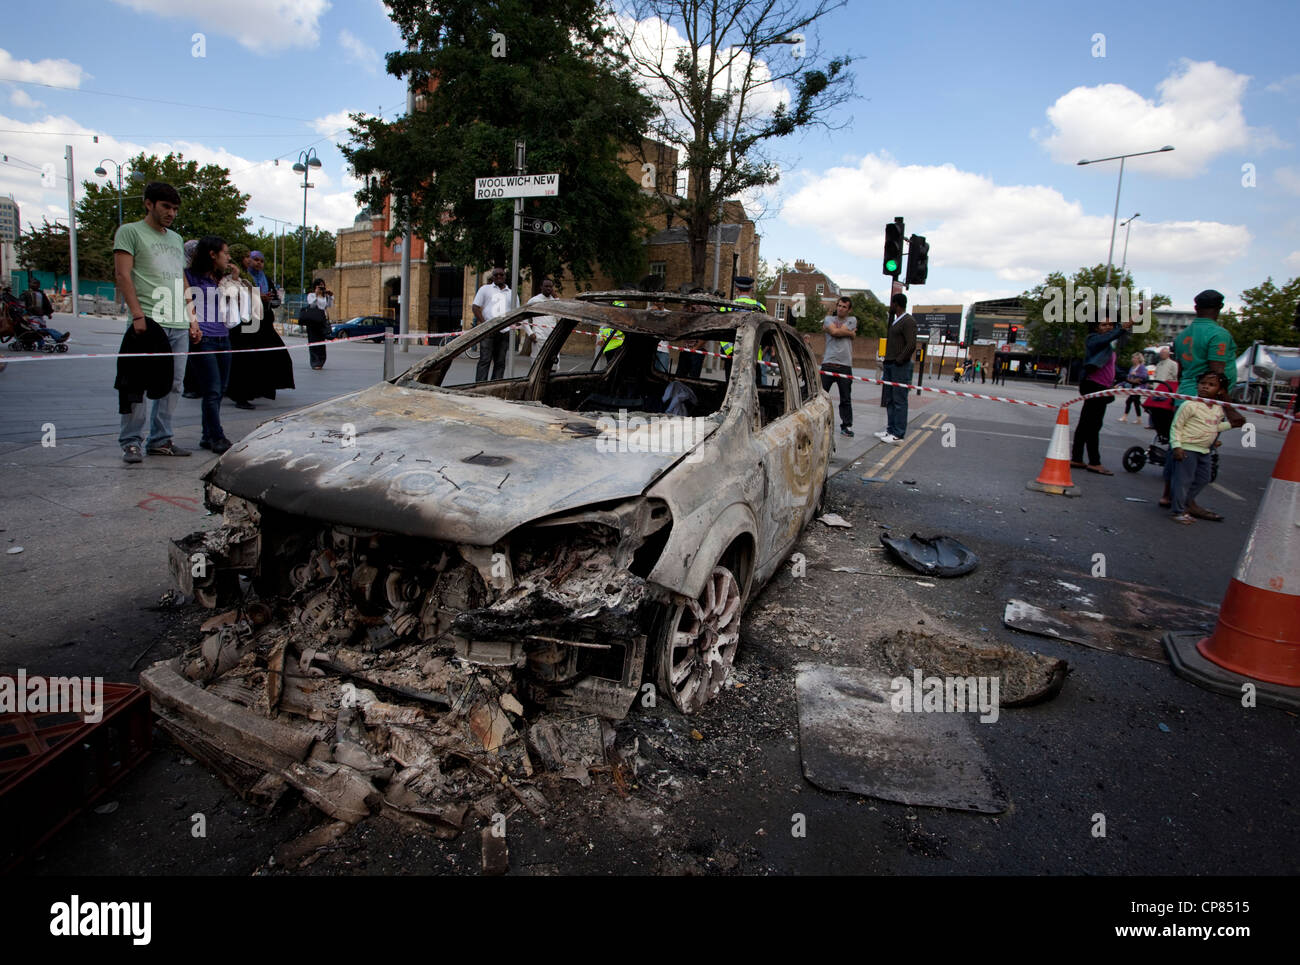 Burnt-out Police car on the street in Woolwich, South London photographed after the 2011 riots Stock Photo